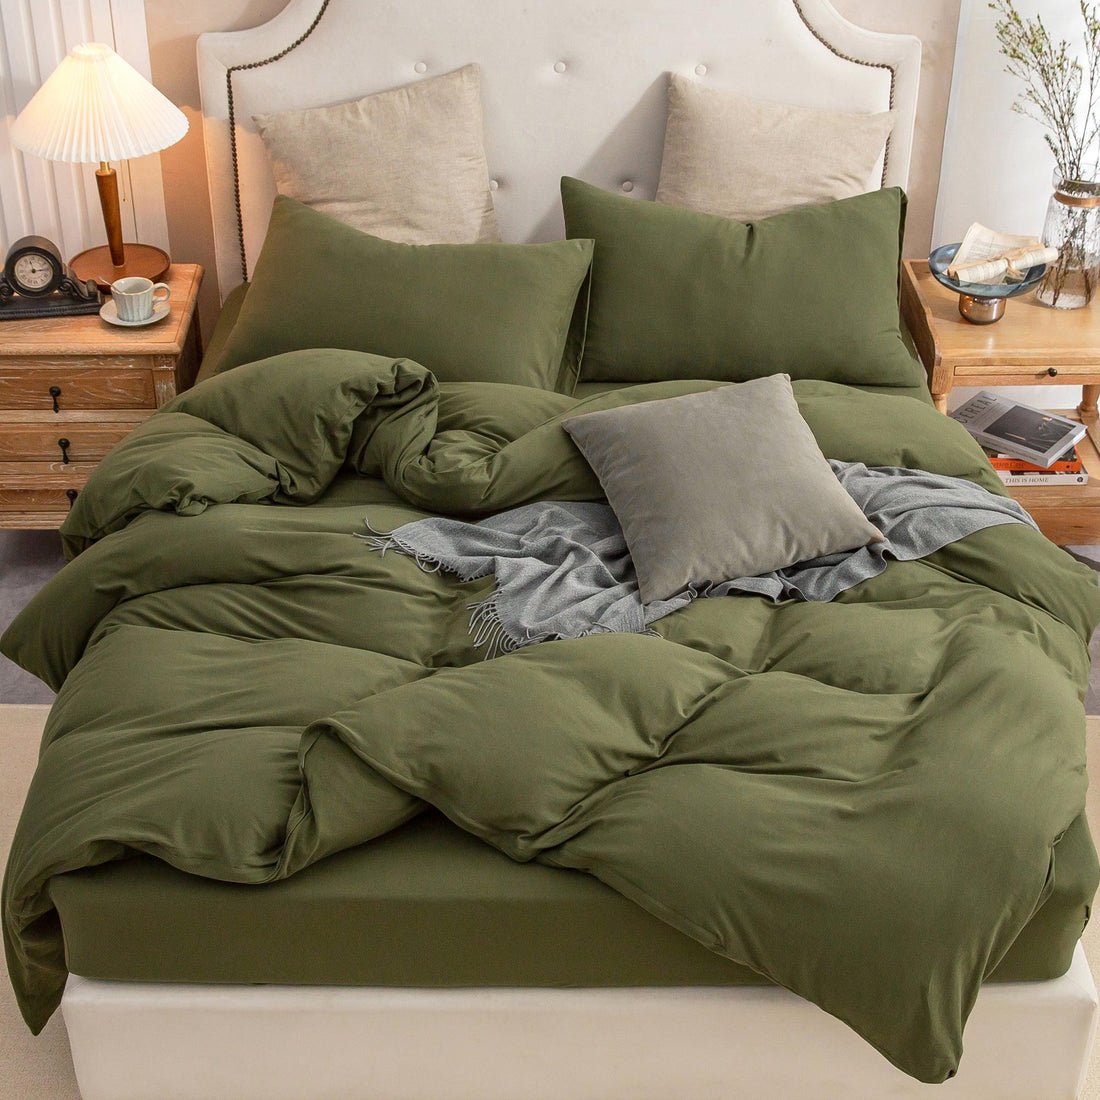 Pure Era - 100% T-shirt cotton Jersey Duvet Cover Set - Olive Green Ultra soft and comfy